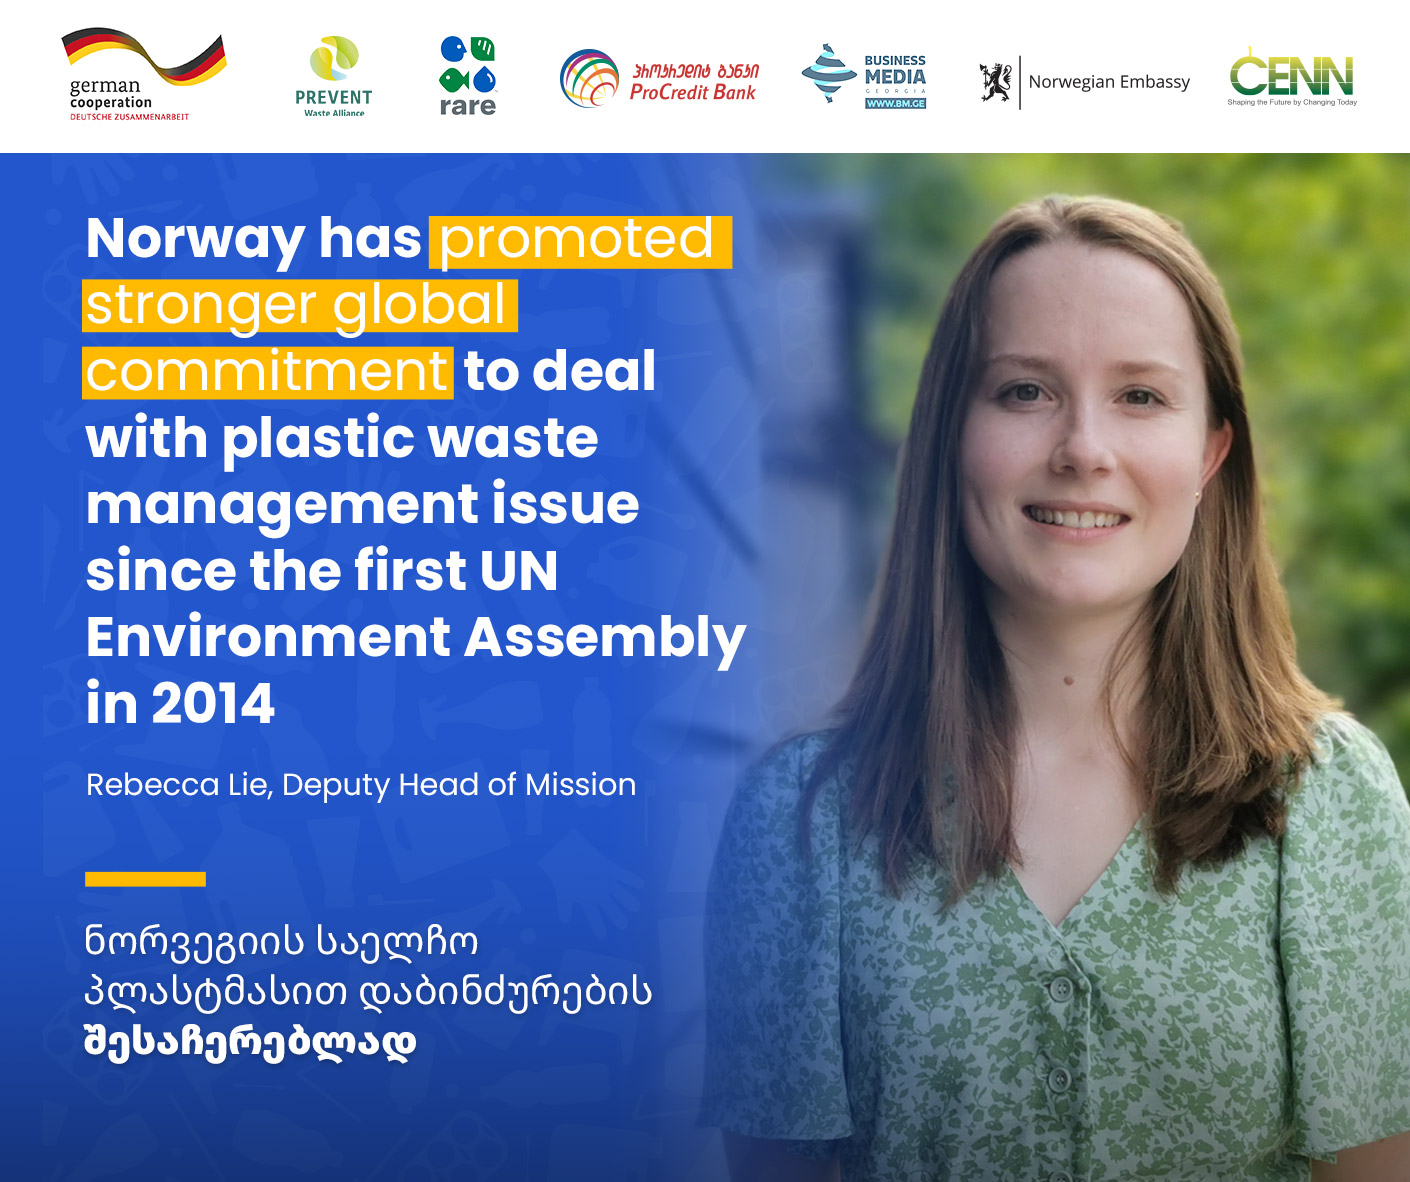 Norwegian Embassy in Georgia is joining the Beat Plastic Pollution Competition